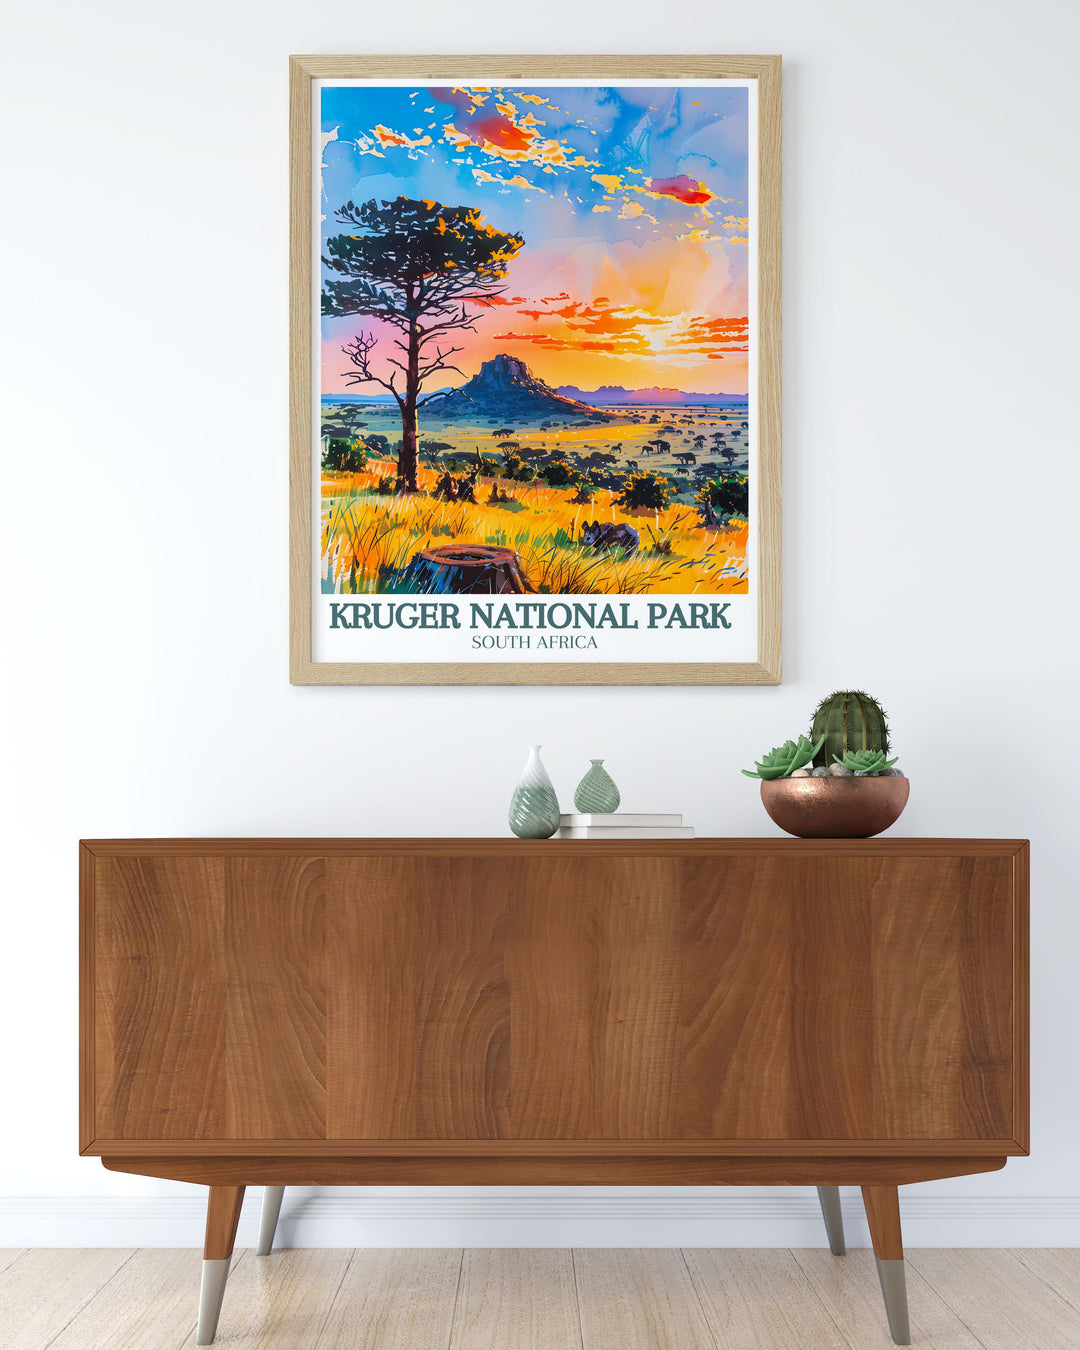 Capturing the dramatic scenery of the Drakensberg Mountains, this travel poster brings the stunning beauty of this iconic range into your home decor. Perfect for those who love rugged landscapes and serene wilderness.